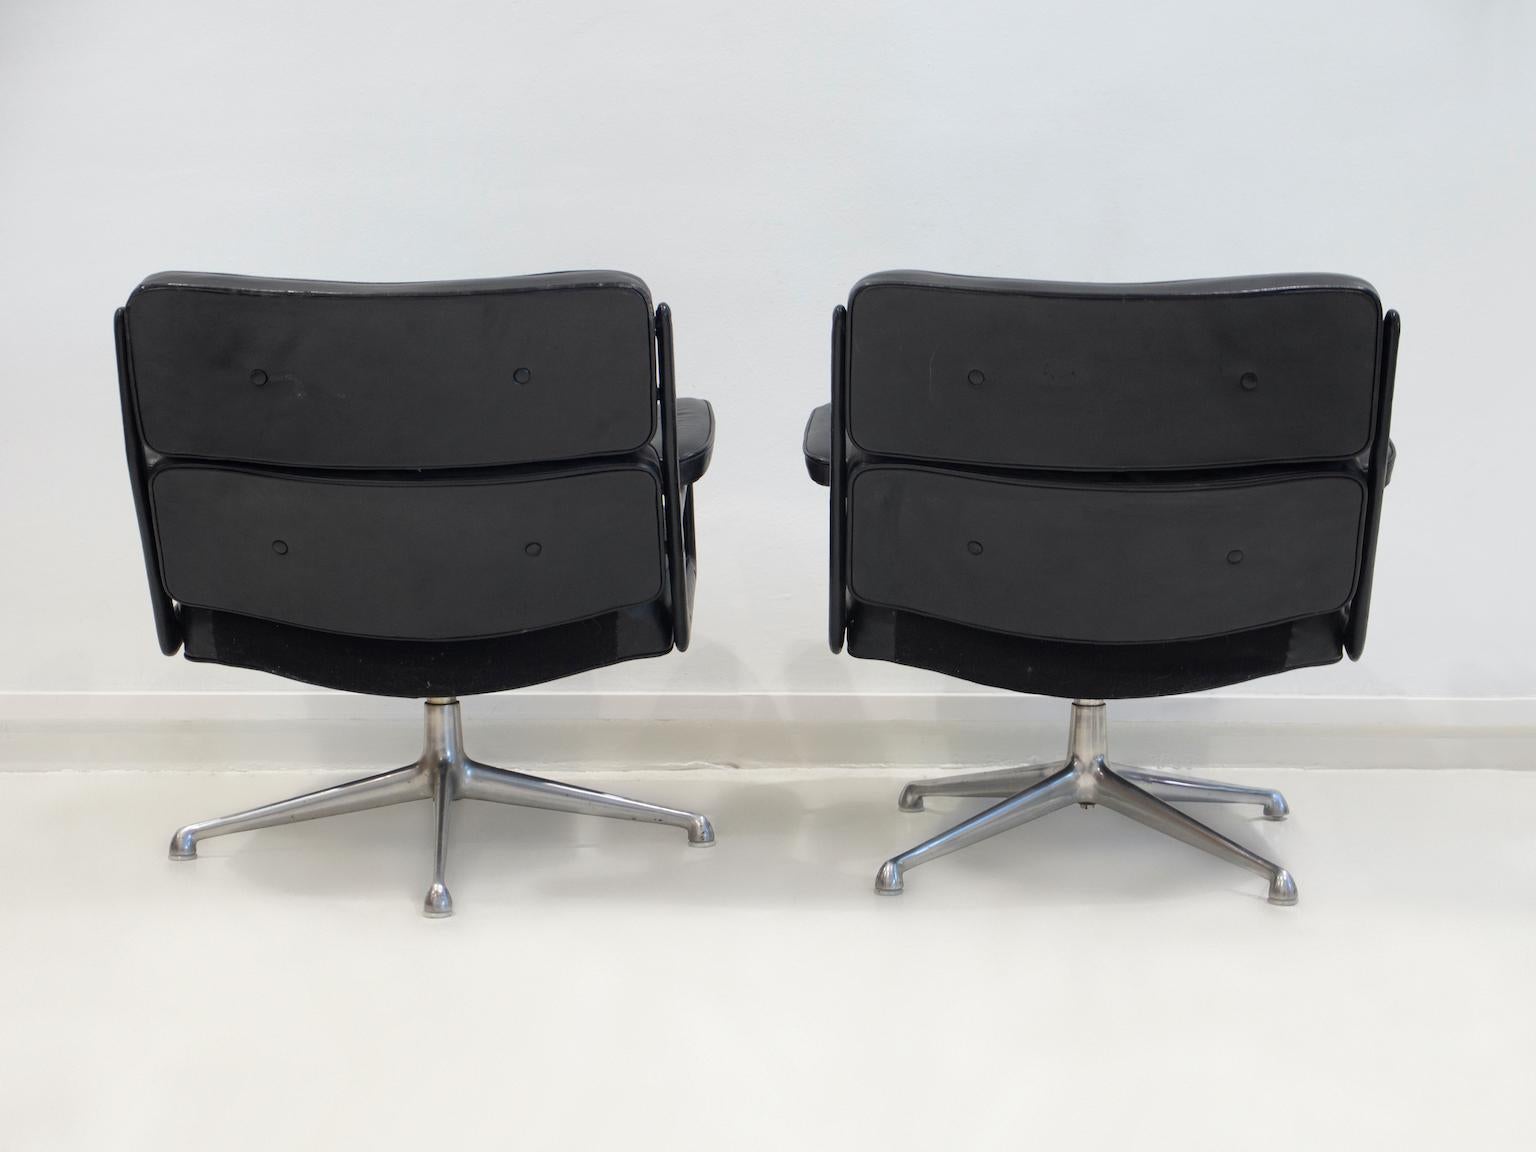 20th Century Pair of Black Leather Executive Chairs by Charles and Ray Eames